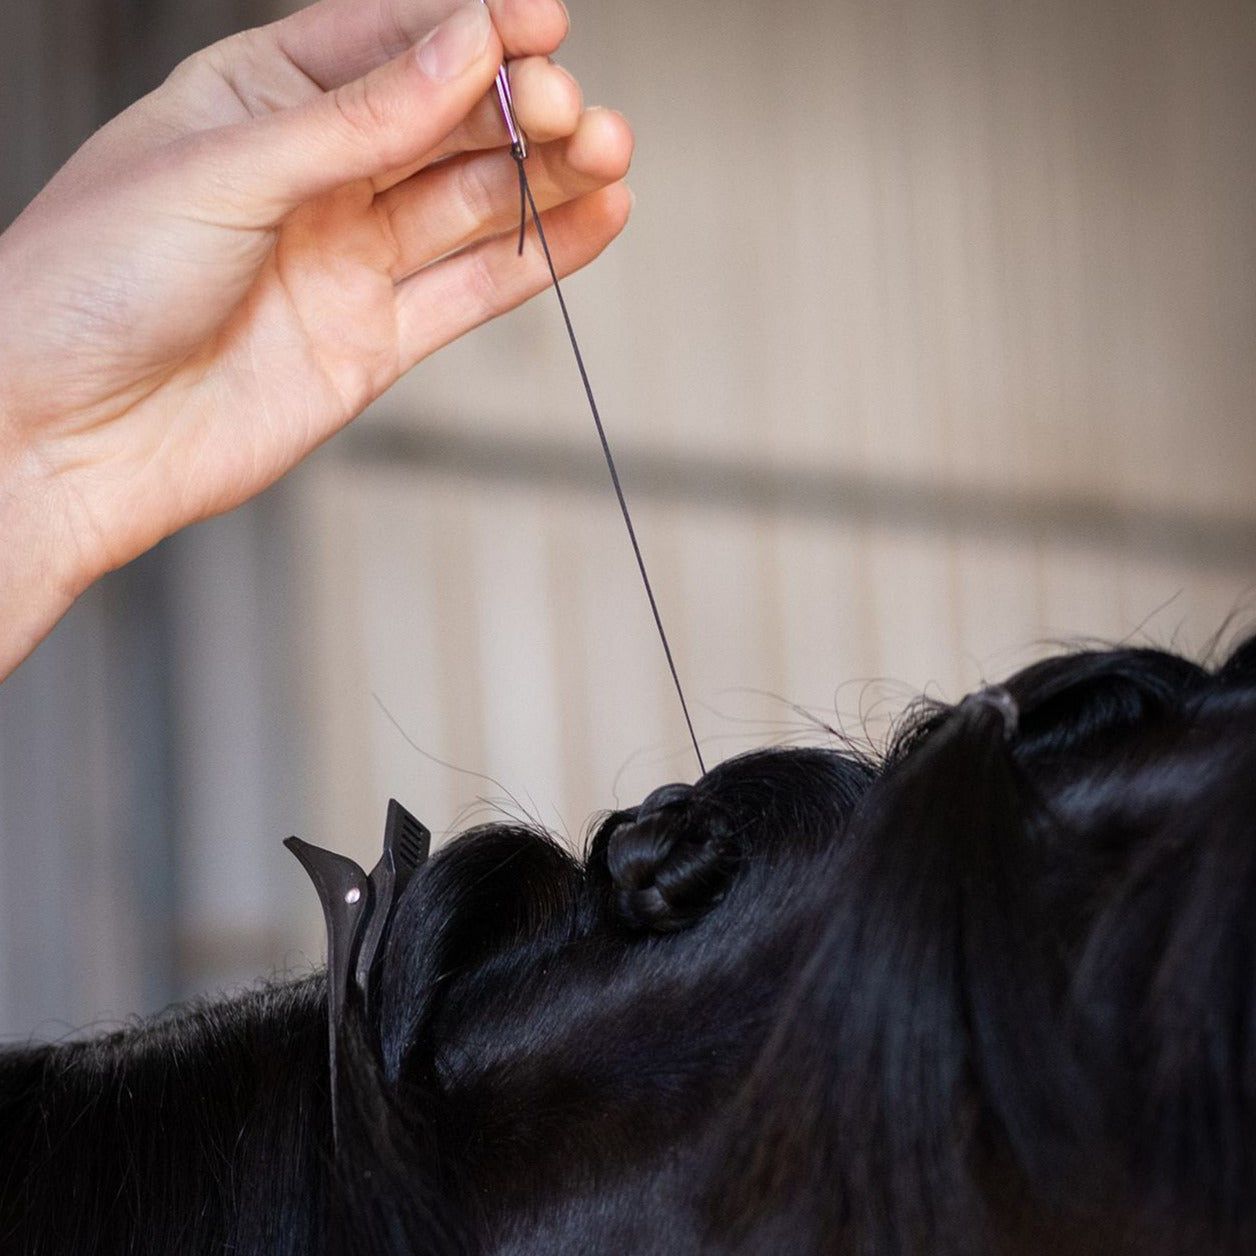 HAIRY PONY FLAT WAXED HORSE PLAITING THREAD being used on a horse's mane